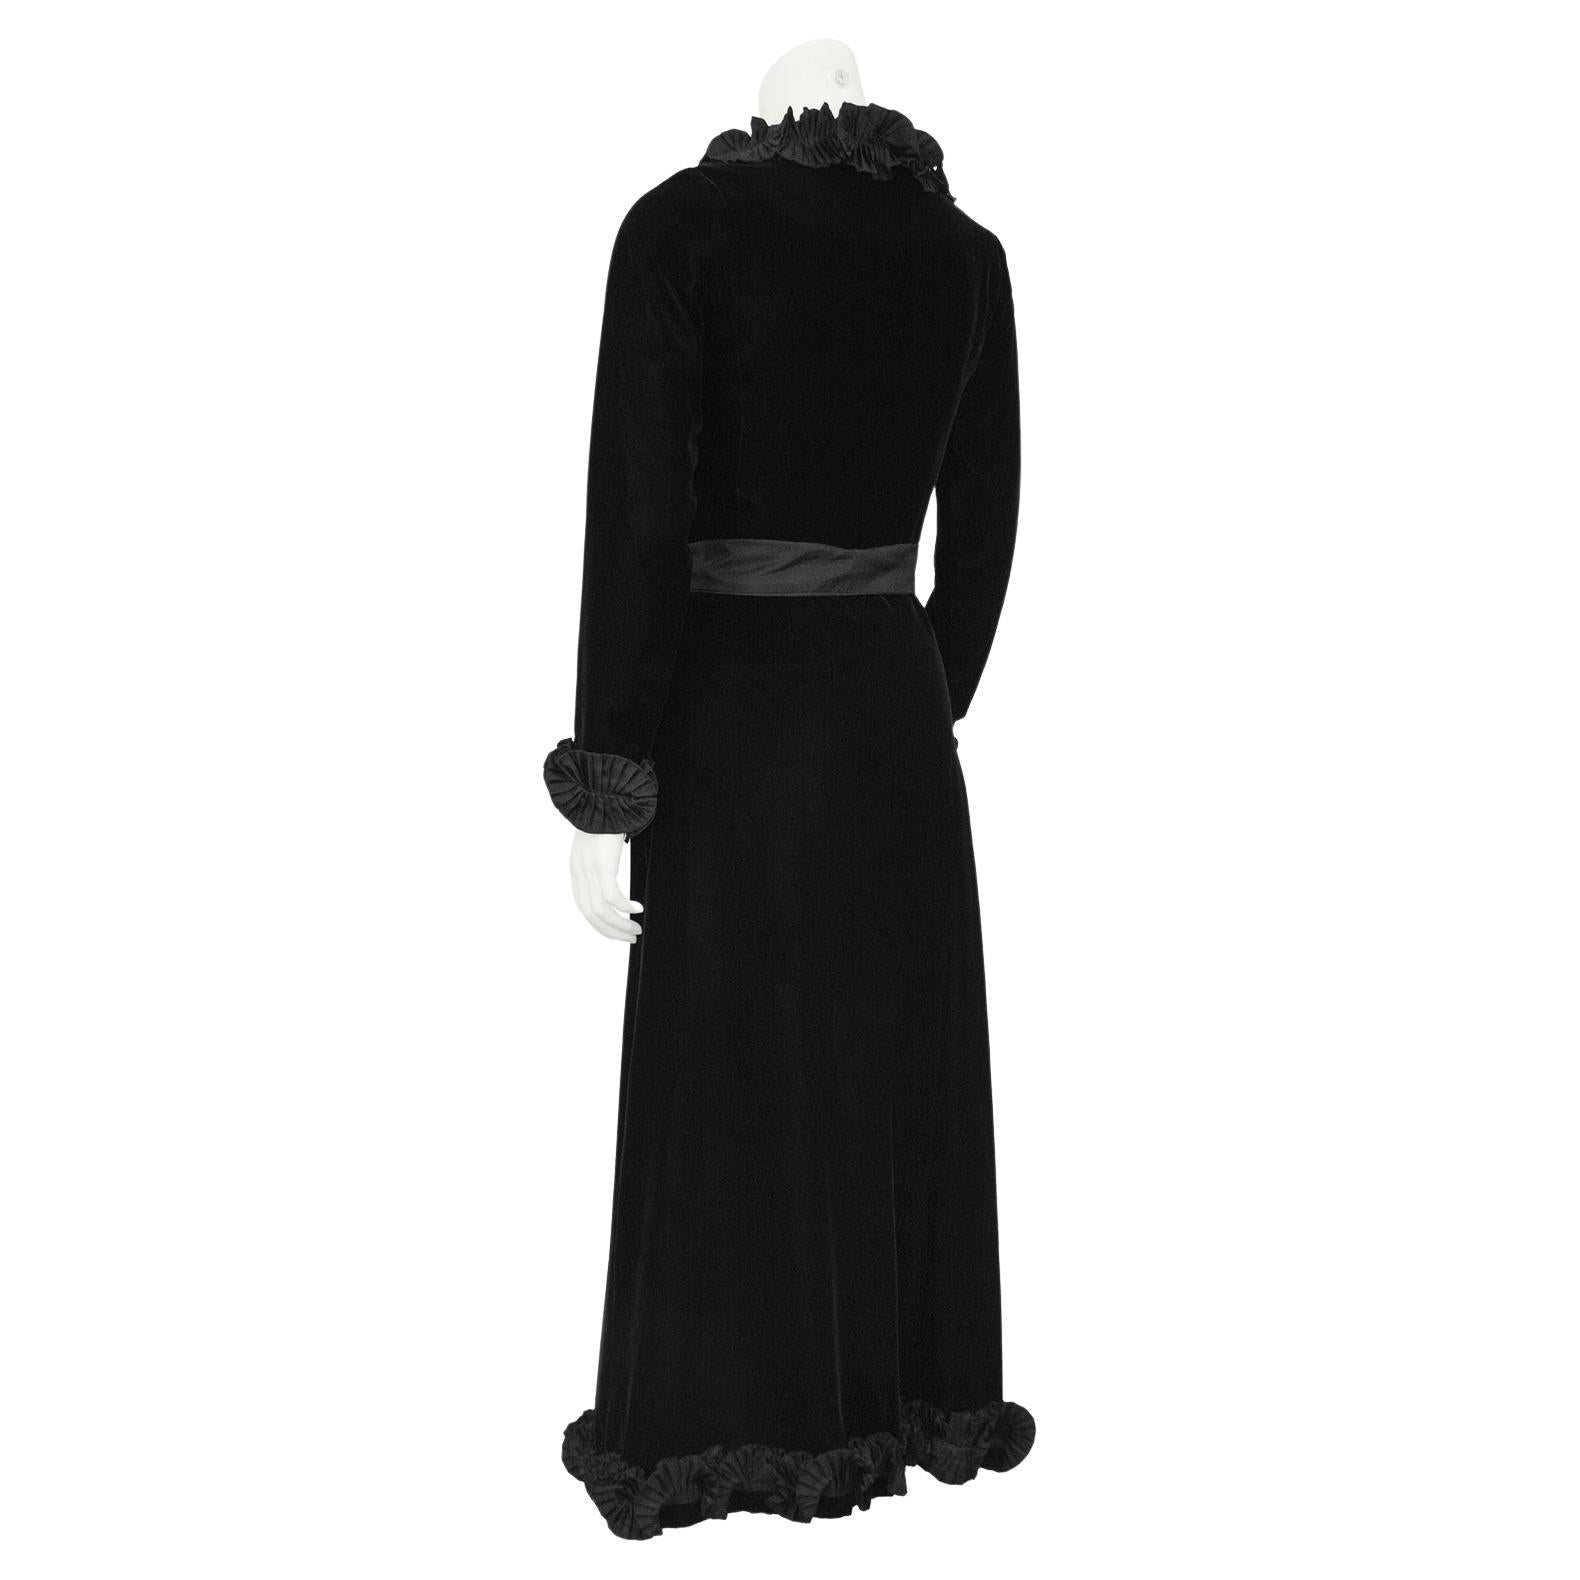 1970s Yves Saint Laurent Black Velvet Wrap Evening Dress with Ruffle Trim  In Good Condition For Sale In Toronto, Ontario